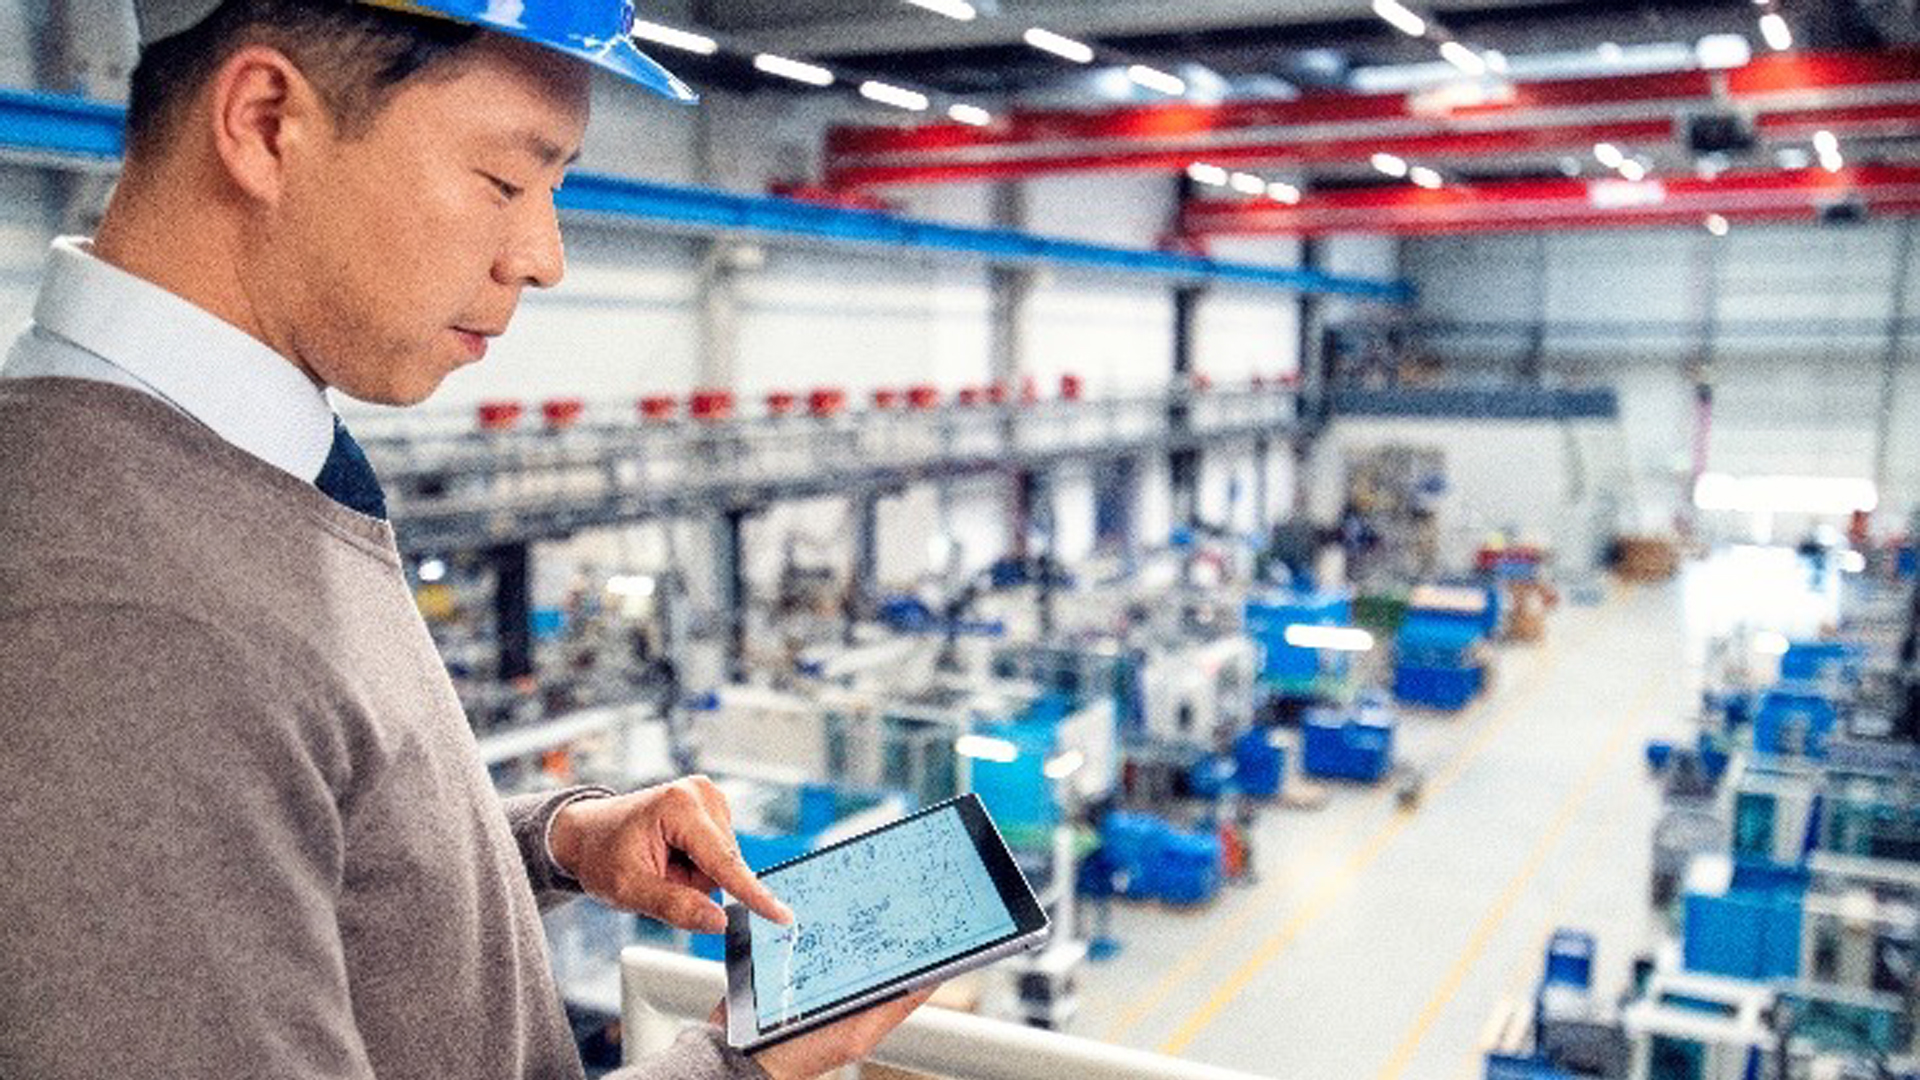 A man oversees the manufacturing floor with a computer tablet